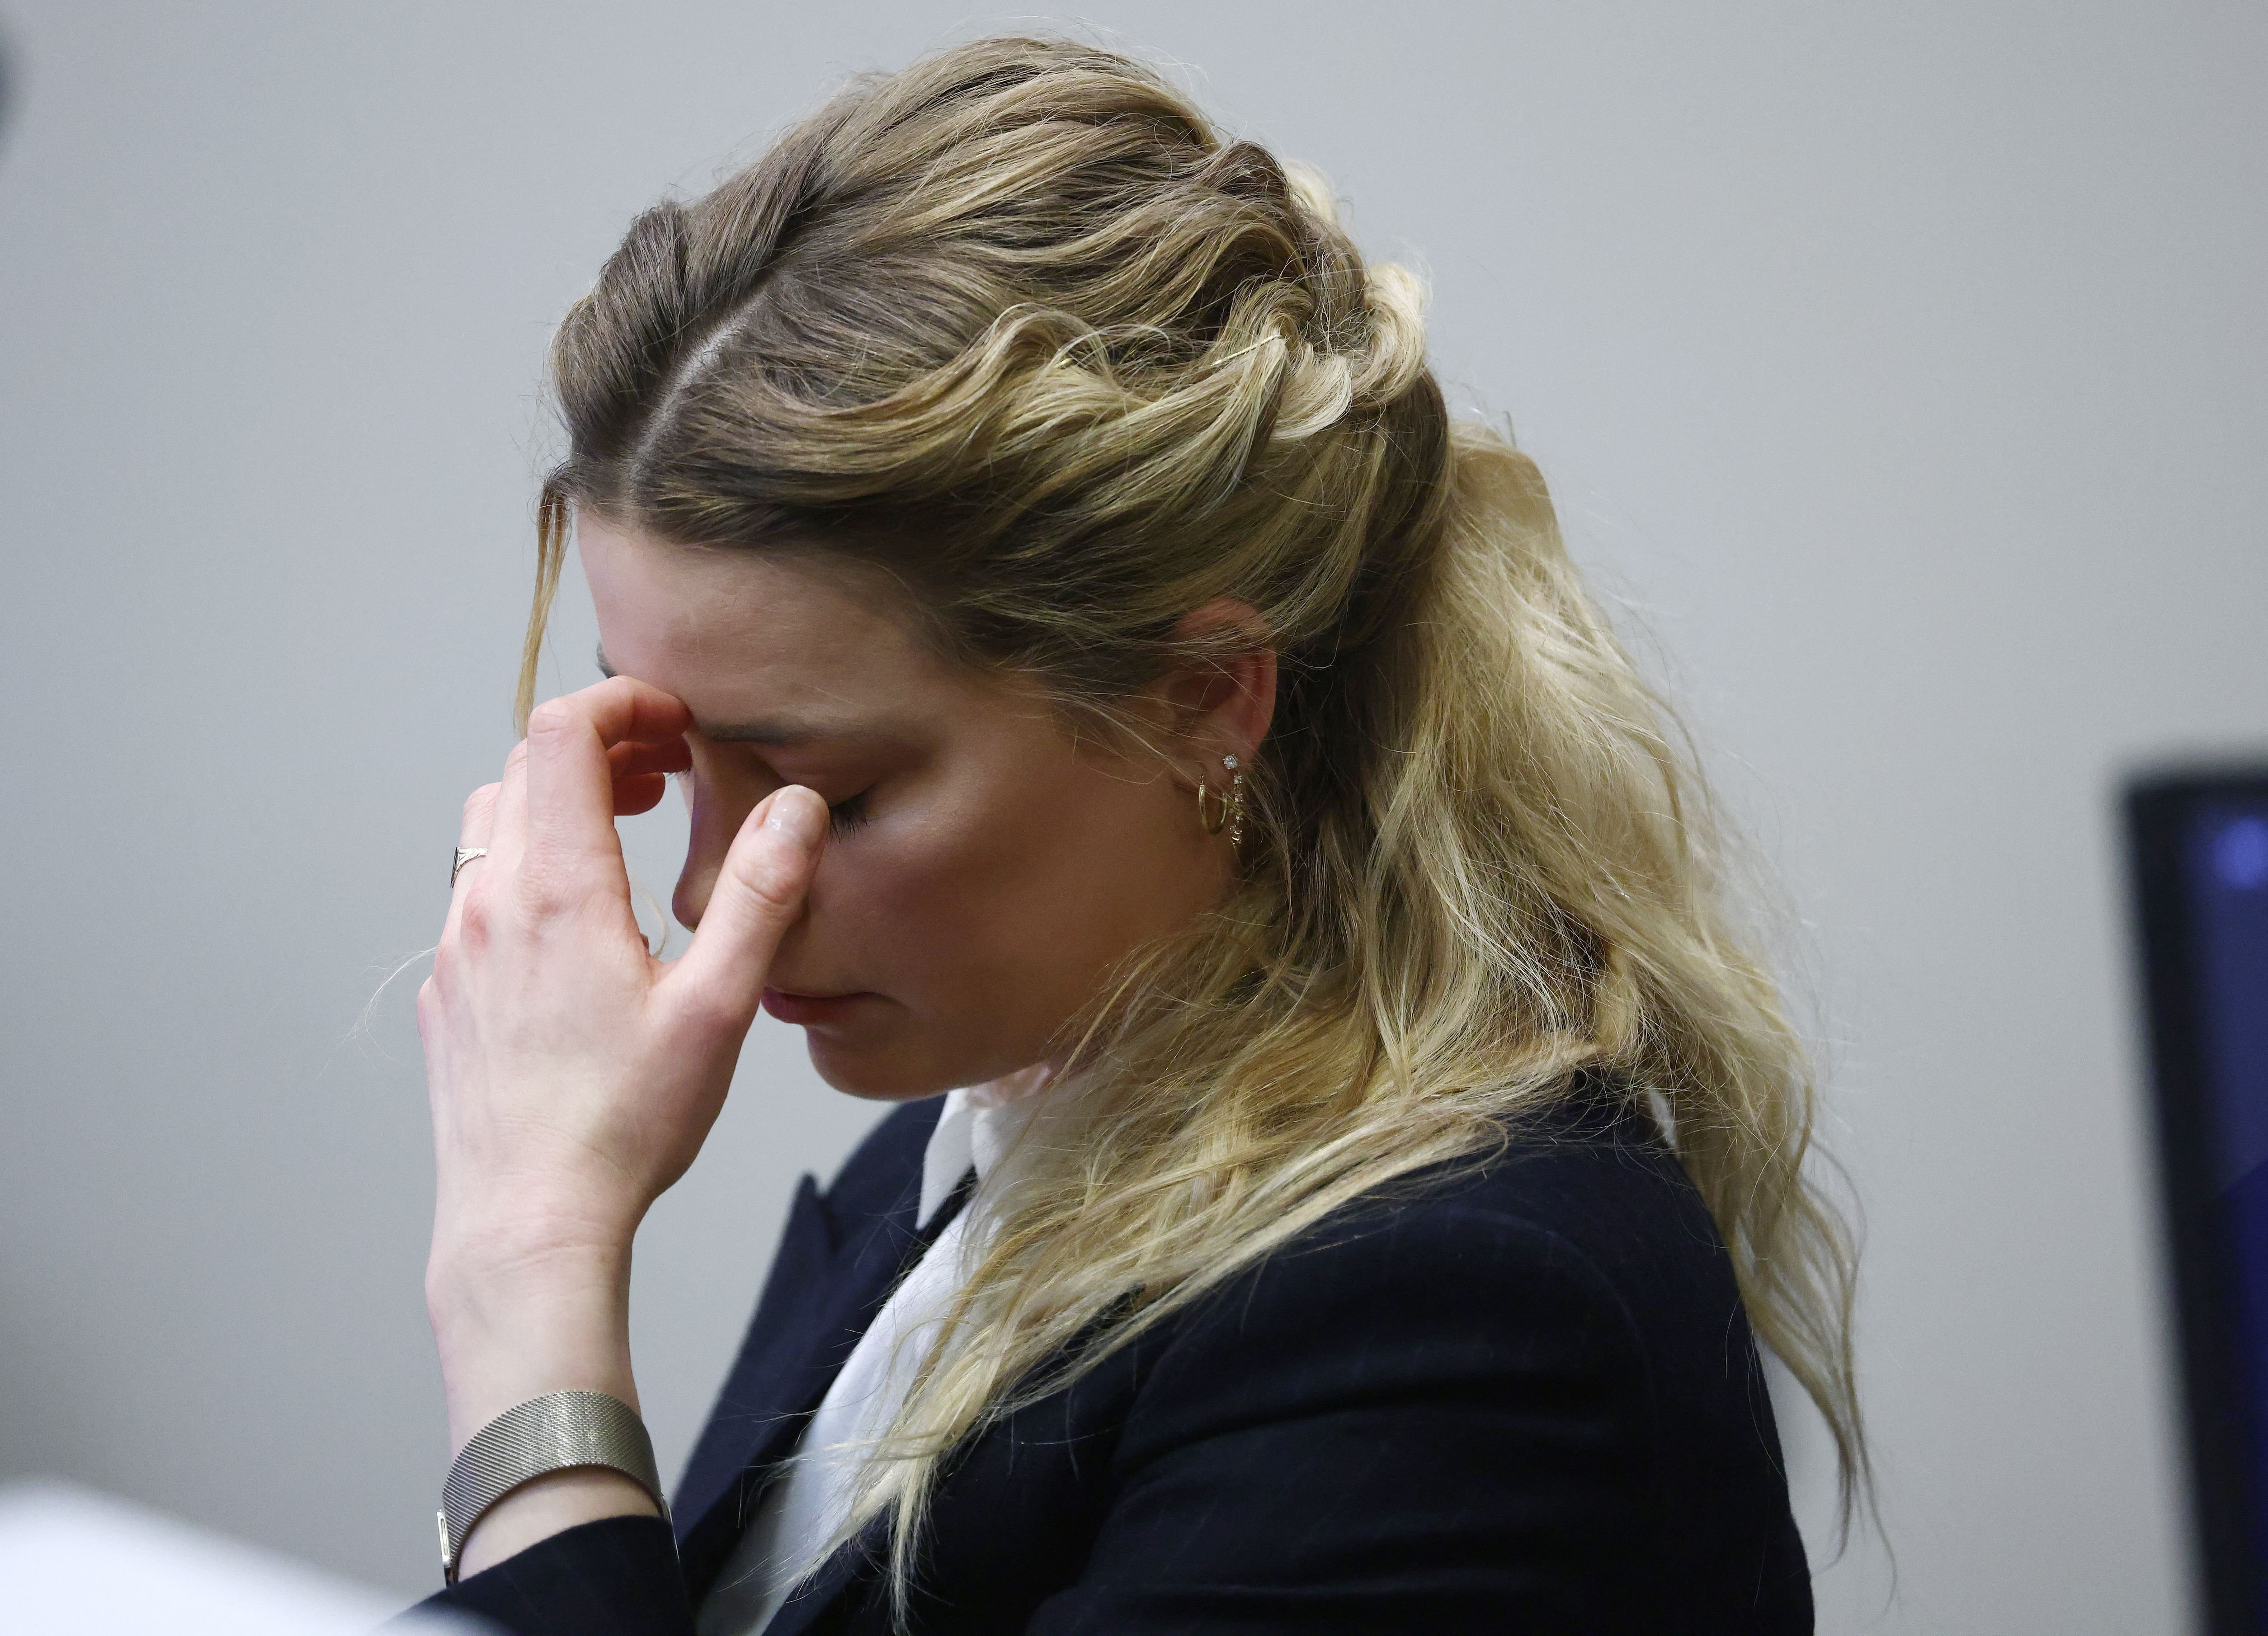 Amber Heard while listening to an audio recording of her and Johhny Depp arguing during the Depp vs Heard $50 million defamation trial at the Fairfax County Circuit Court in Fairfax, Virginia, April 21, 2022. | Source: Getty Images